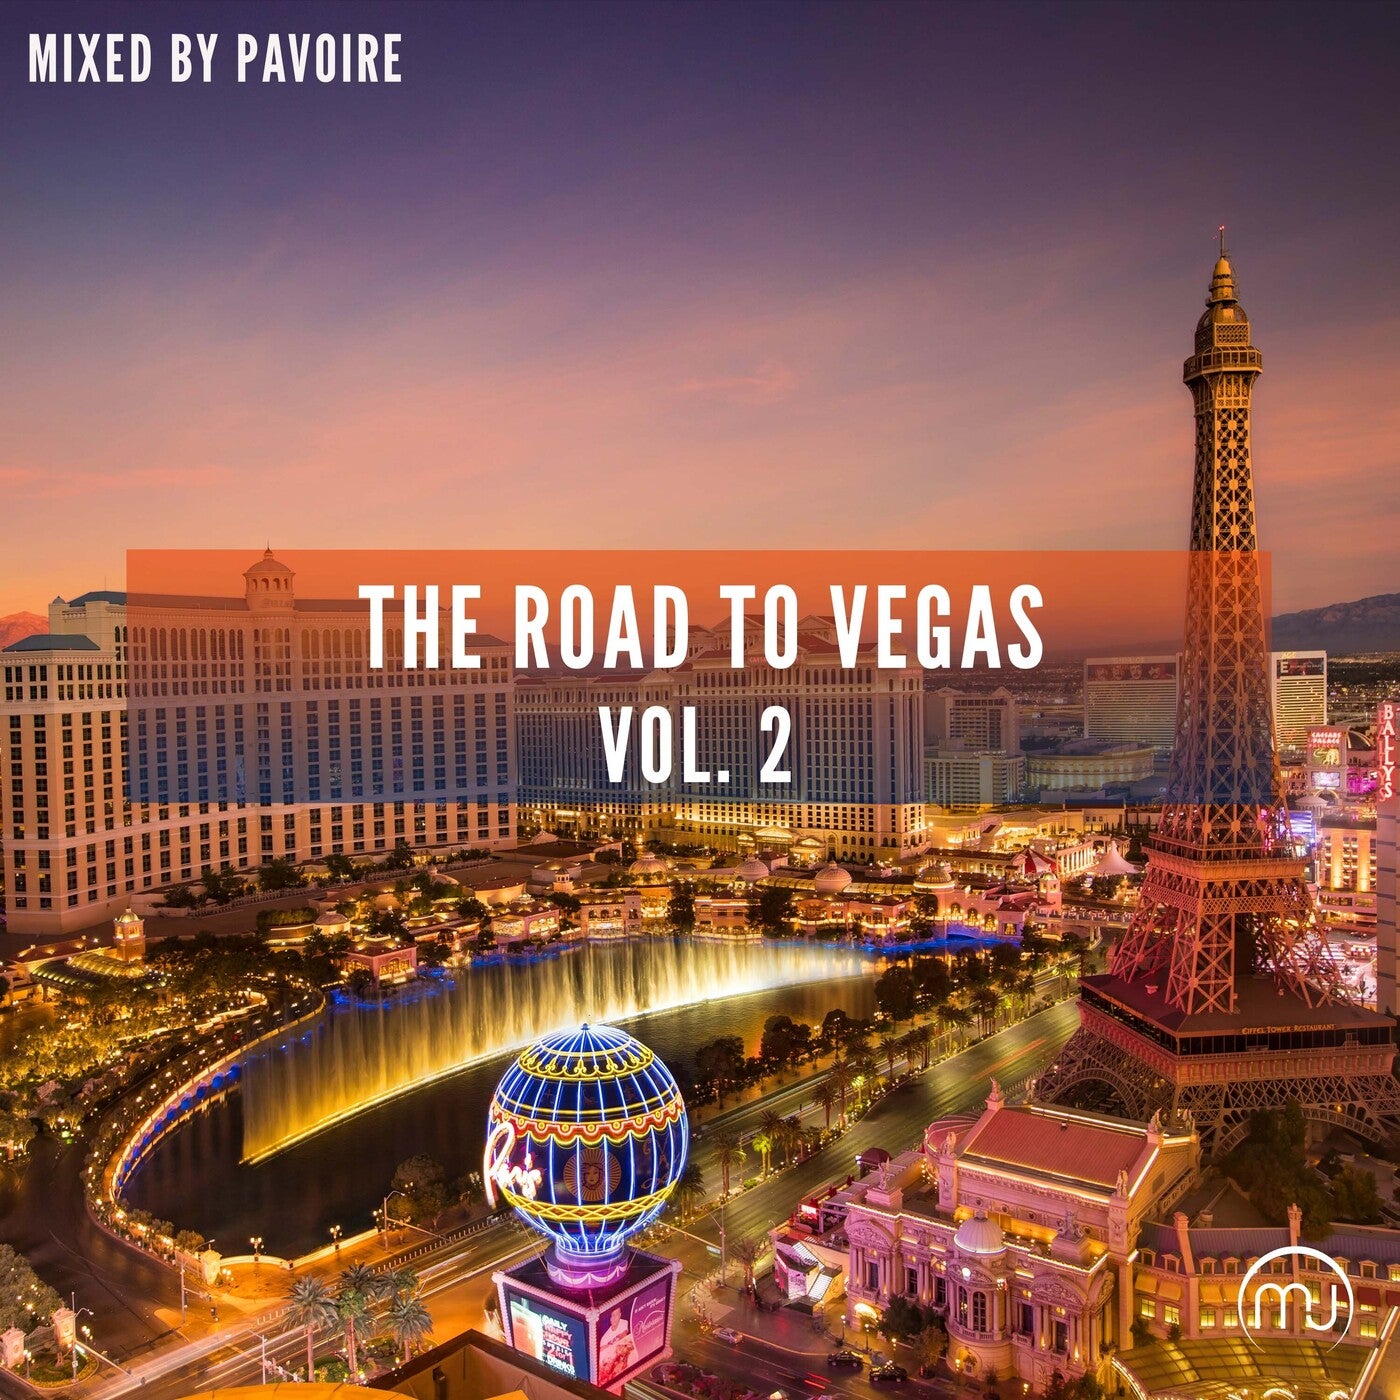 The Road to Vegas Vol. 2